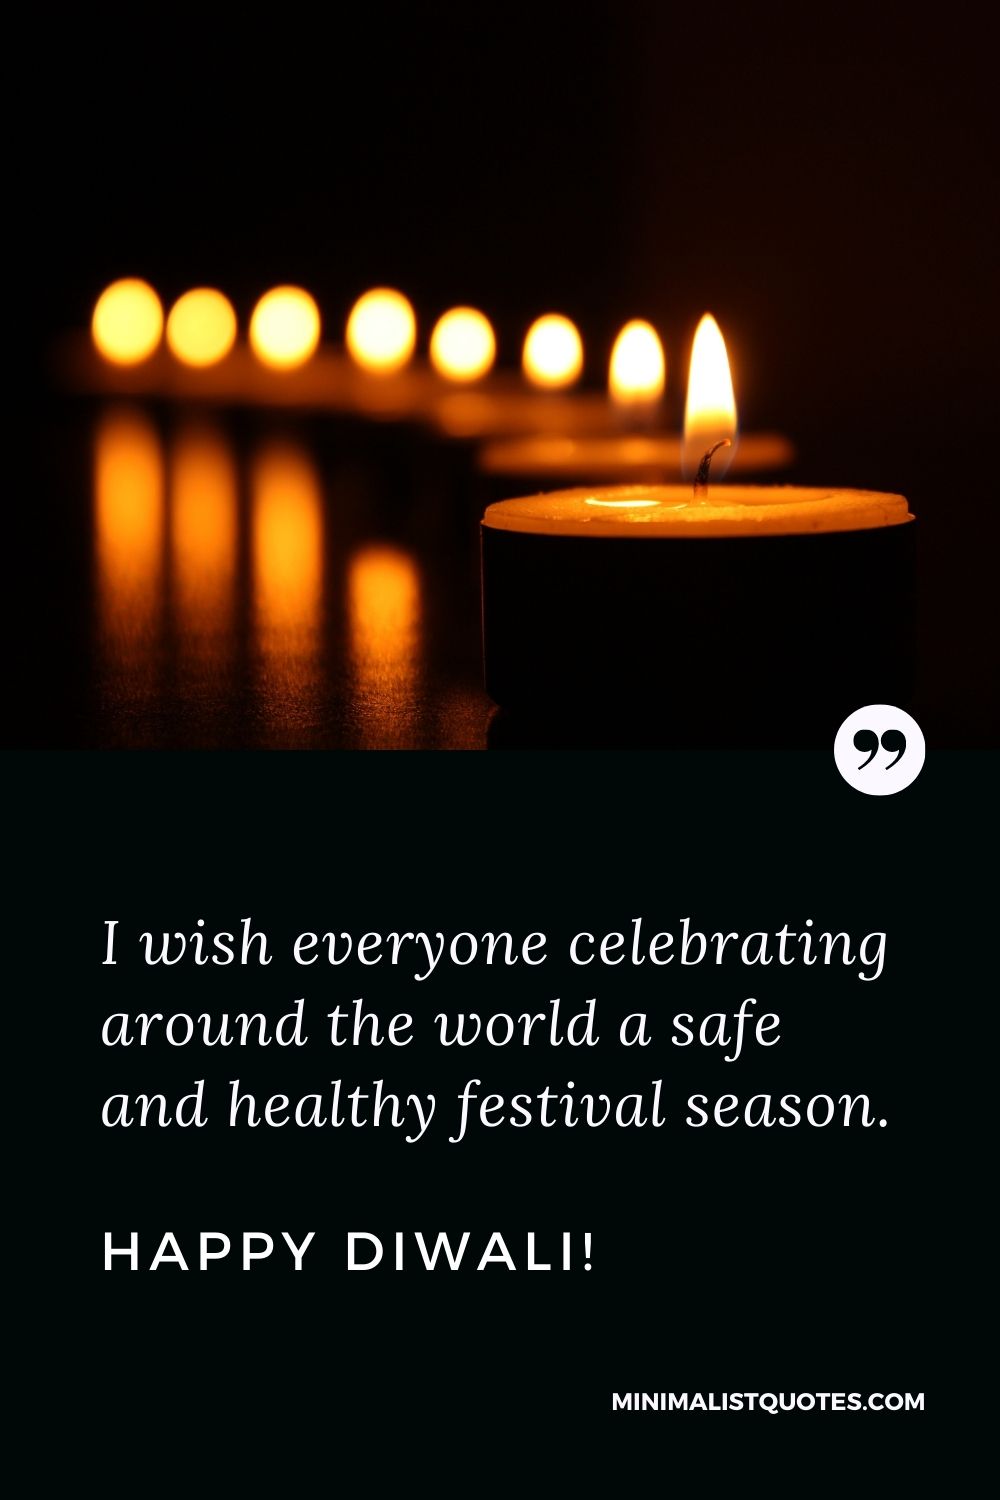 Diwali Quote, Wish & Message With Image: I wish everyone celebrating around the world a safe and healthy festival season. Happy Diwali!